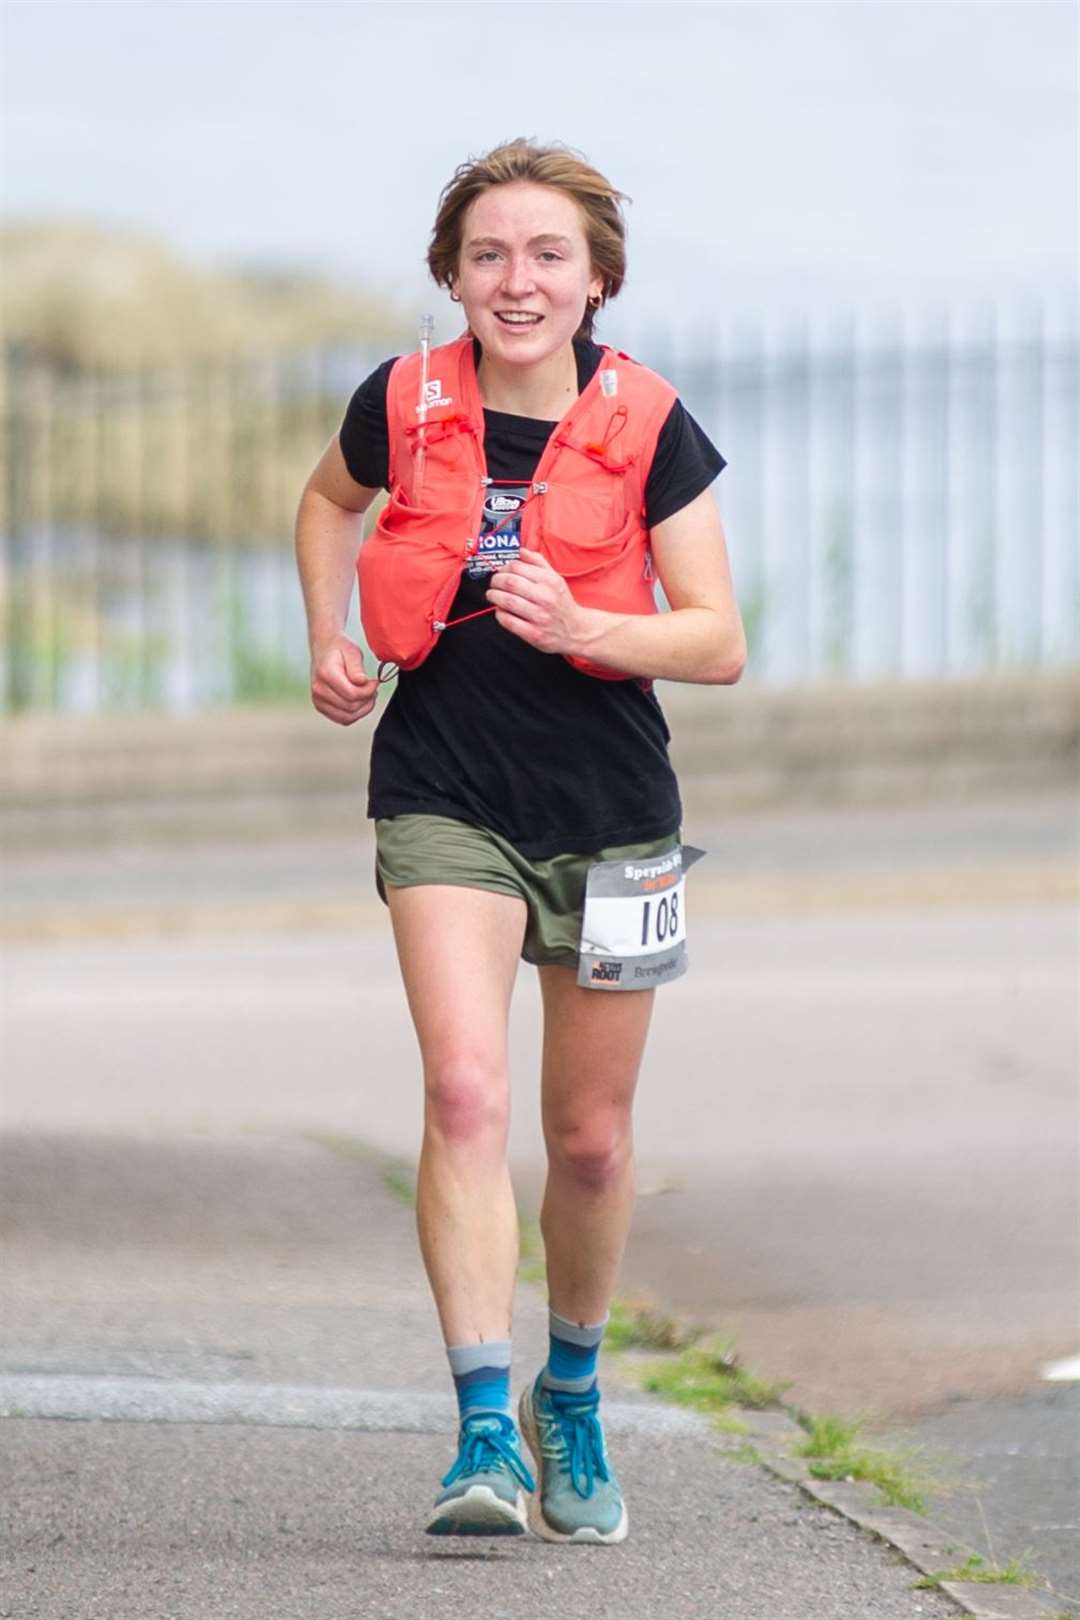 First home for the ladies in 2021 was US runner Katherine Scheibner. Picture: Daniel Forsyth